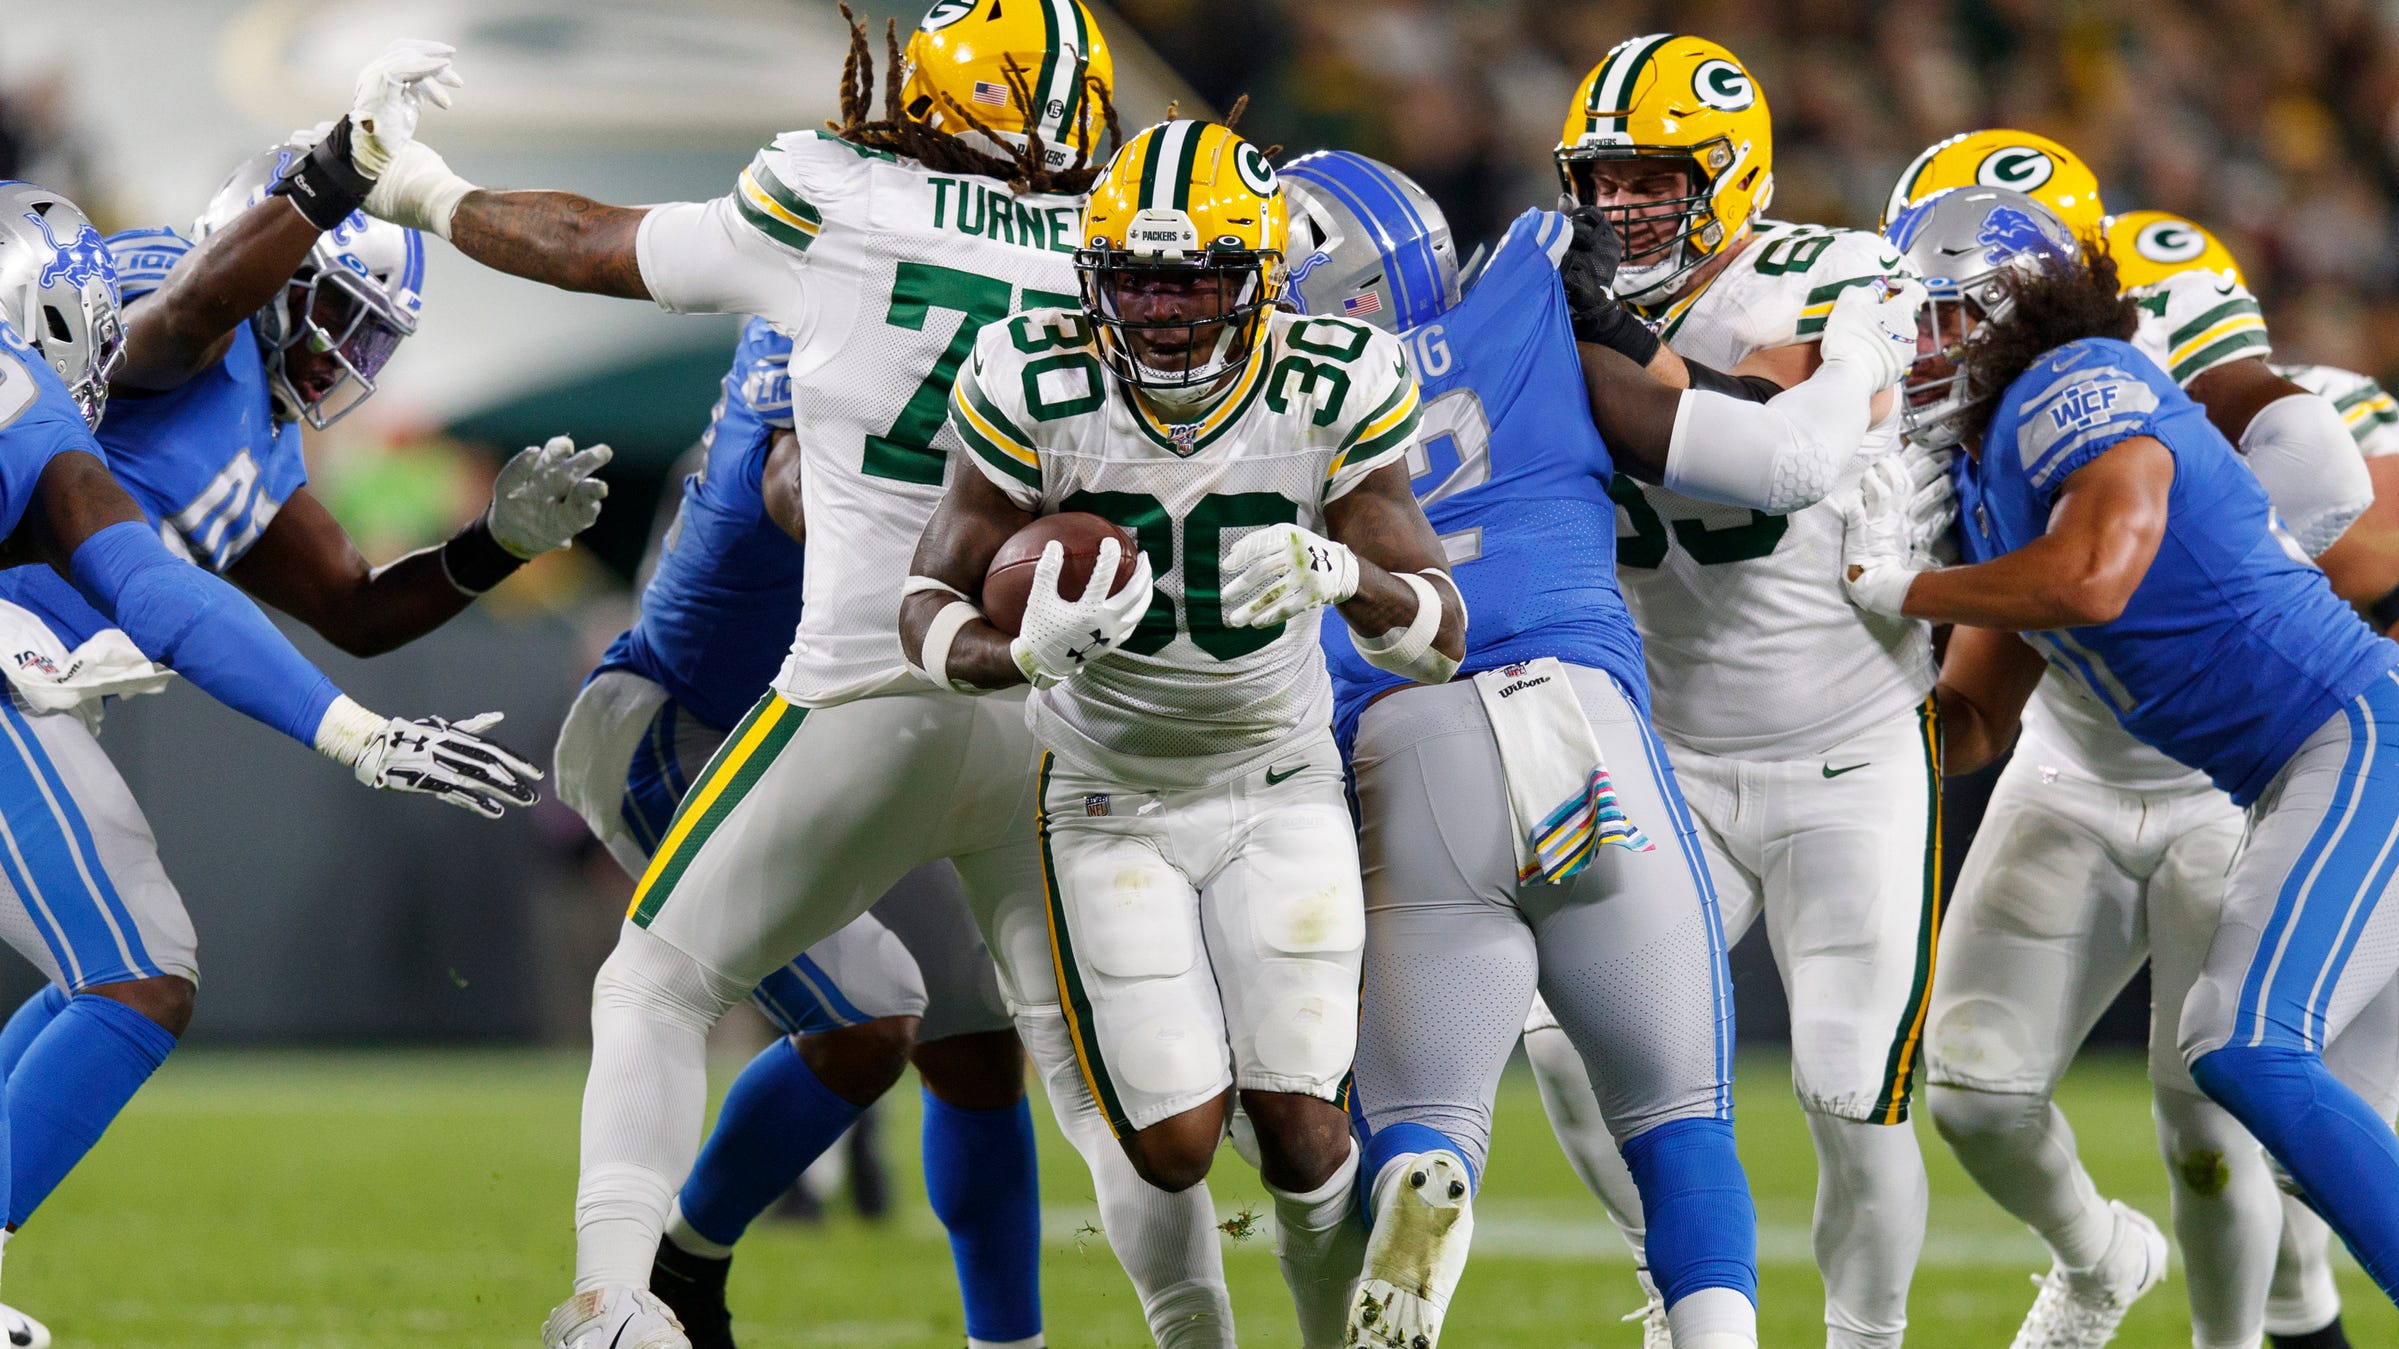 Green Bay Packers running back Jamaal Williams rushes with the football during the second quarter against the Detroit Lions at Lambeau Field in Green Bay, Wis., Oct. 14, 2019.